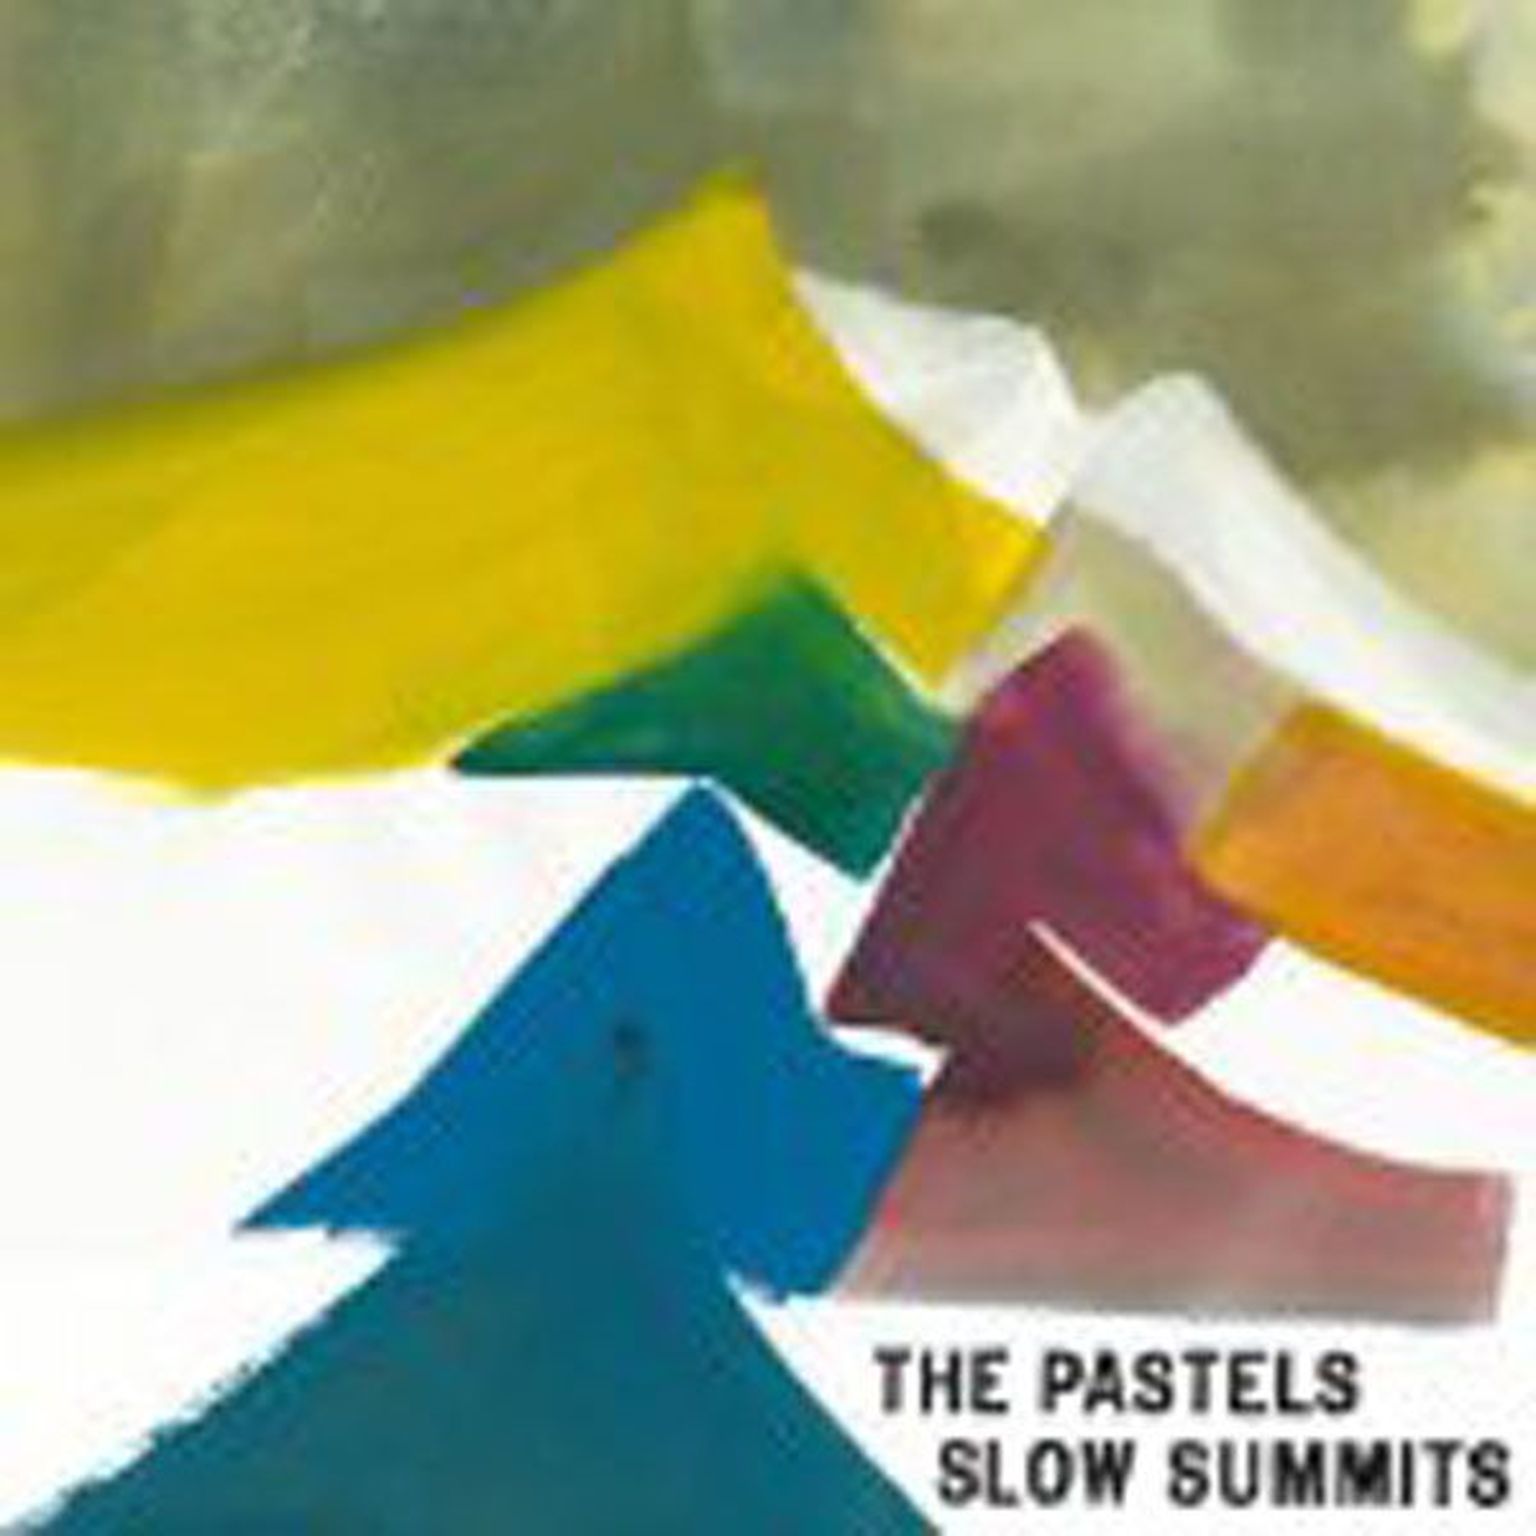 The Pastels
Slow Summits 
(Domino)